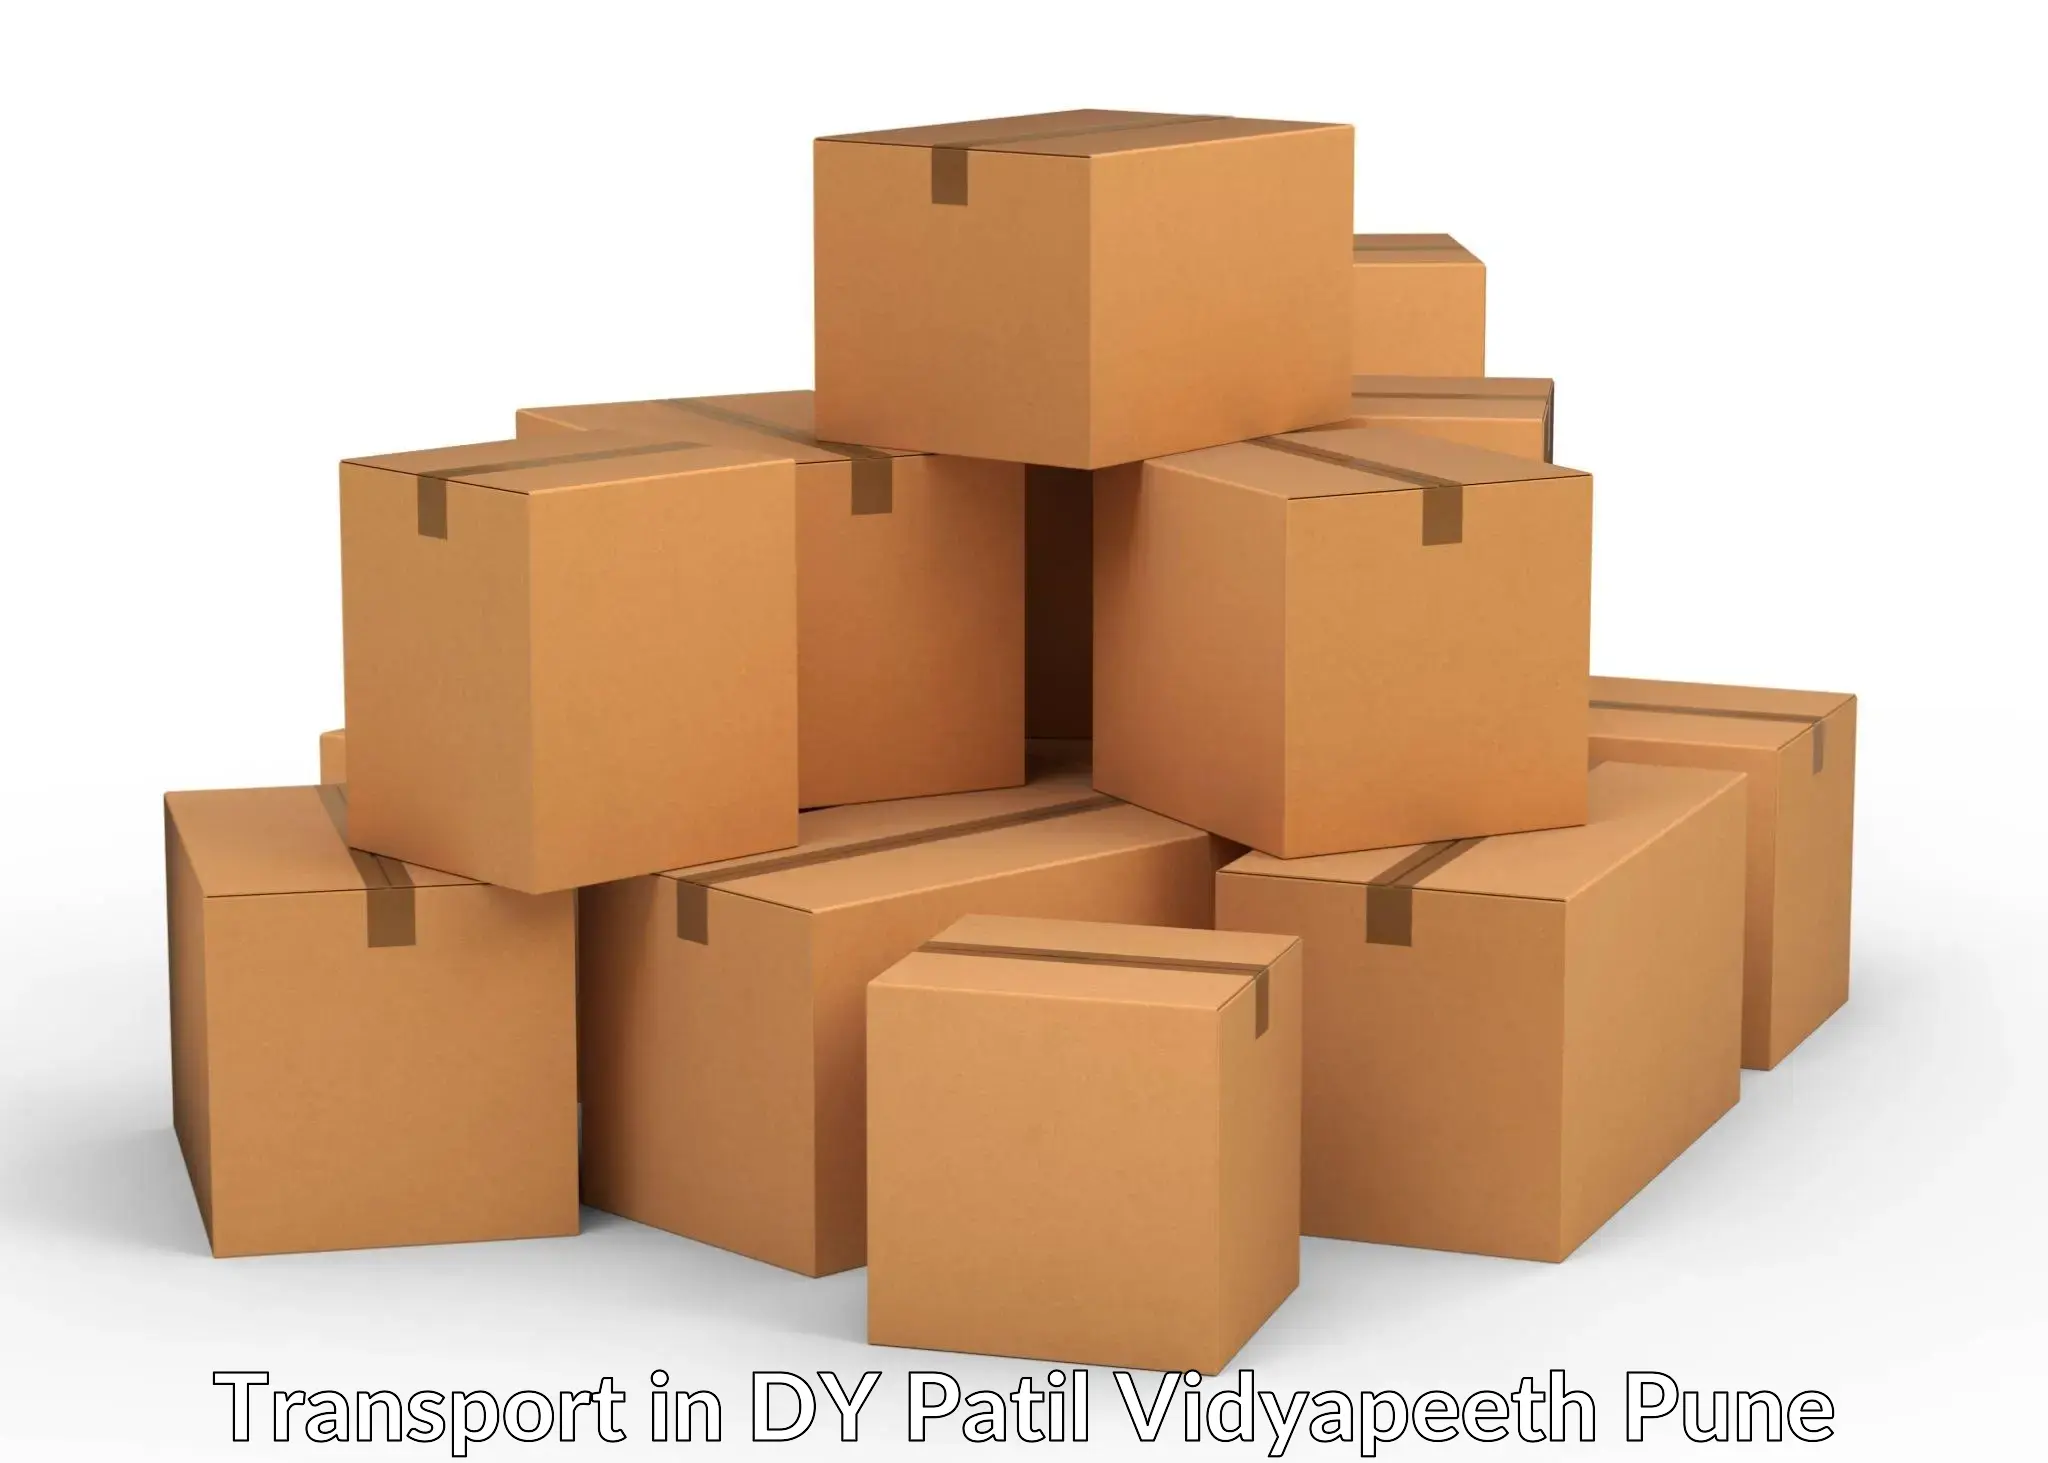 Daily parcel service transport in DY Patil Vidyapeeth Pune